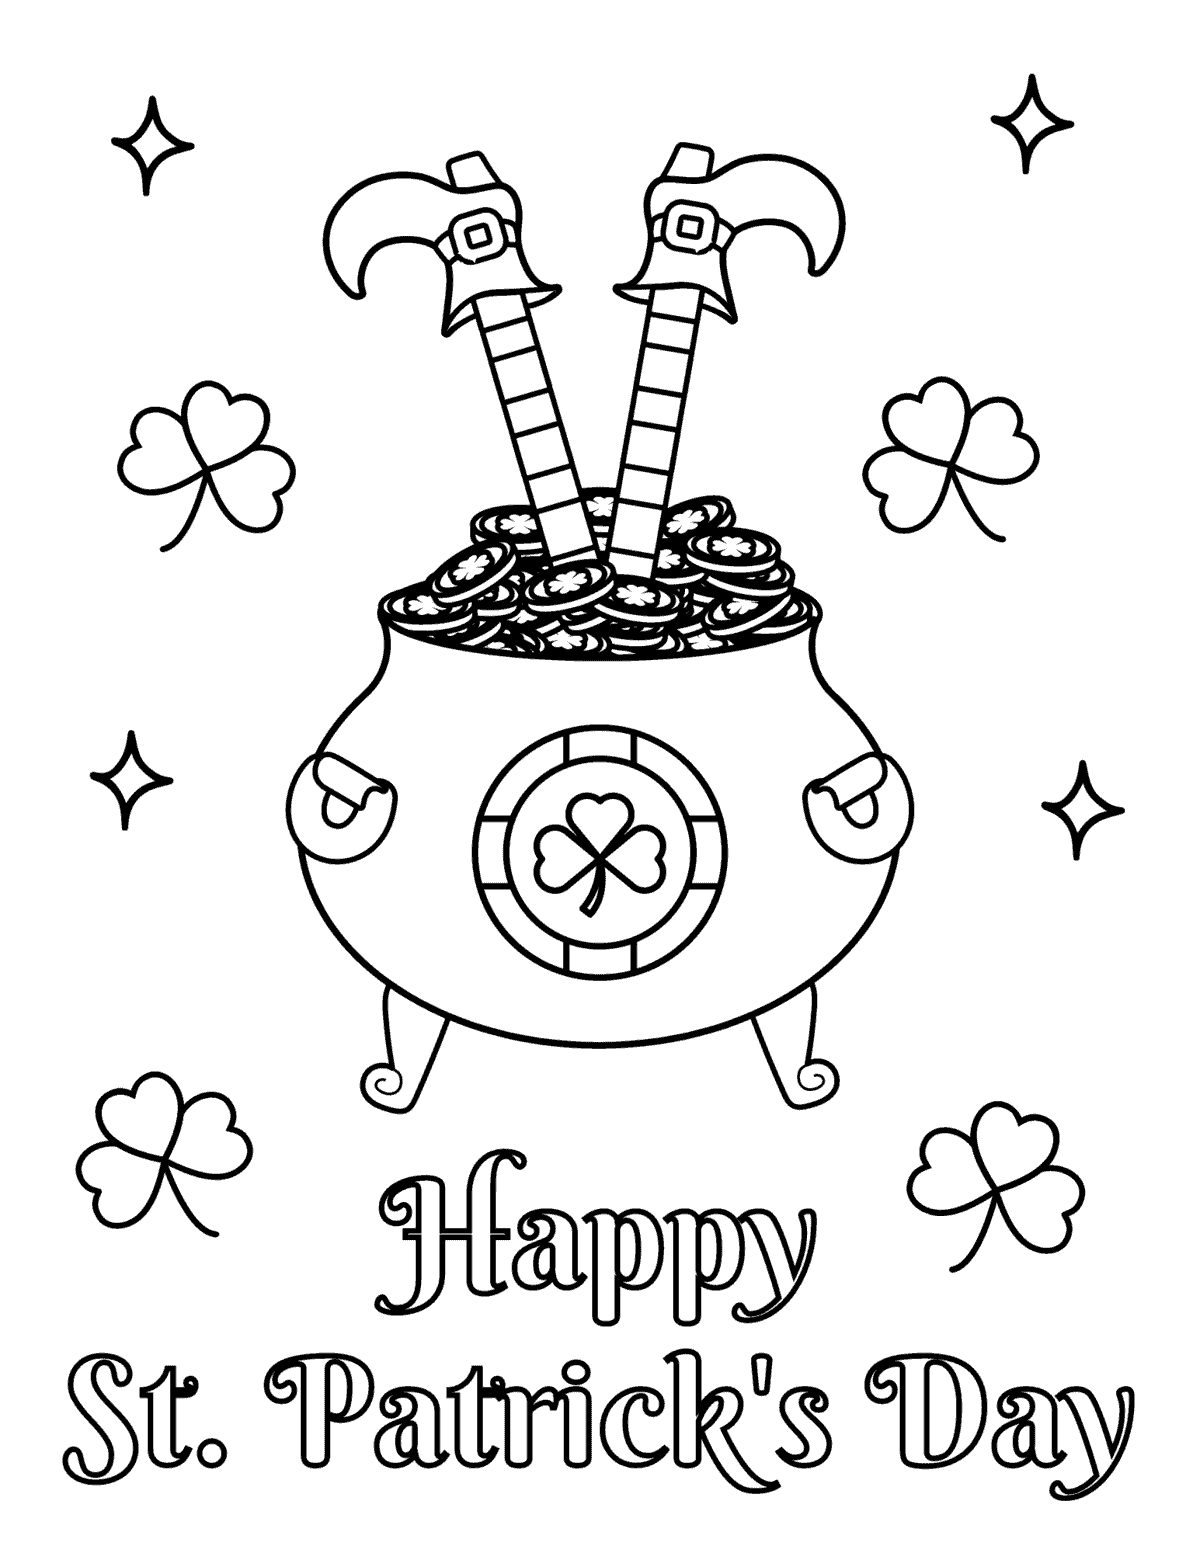 st patrick's day coloring page with an upside down leprechaun in a pot of gold